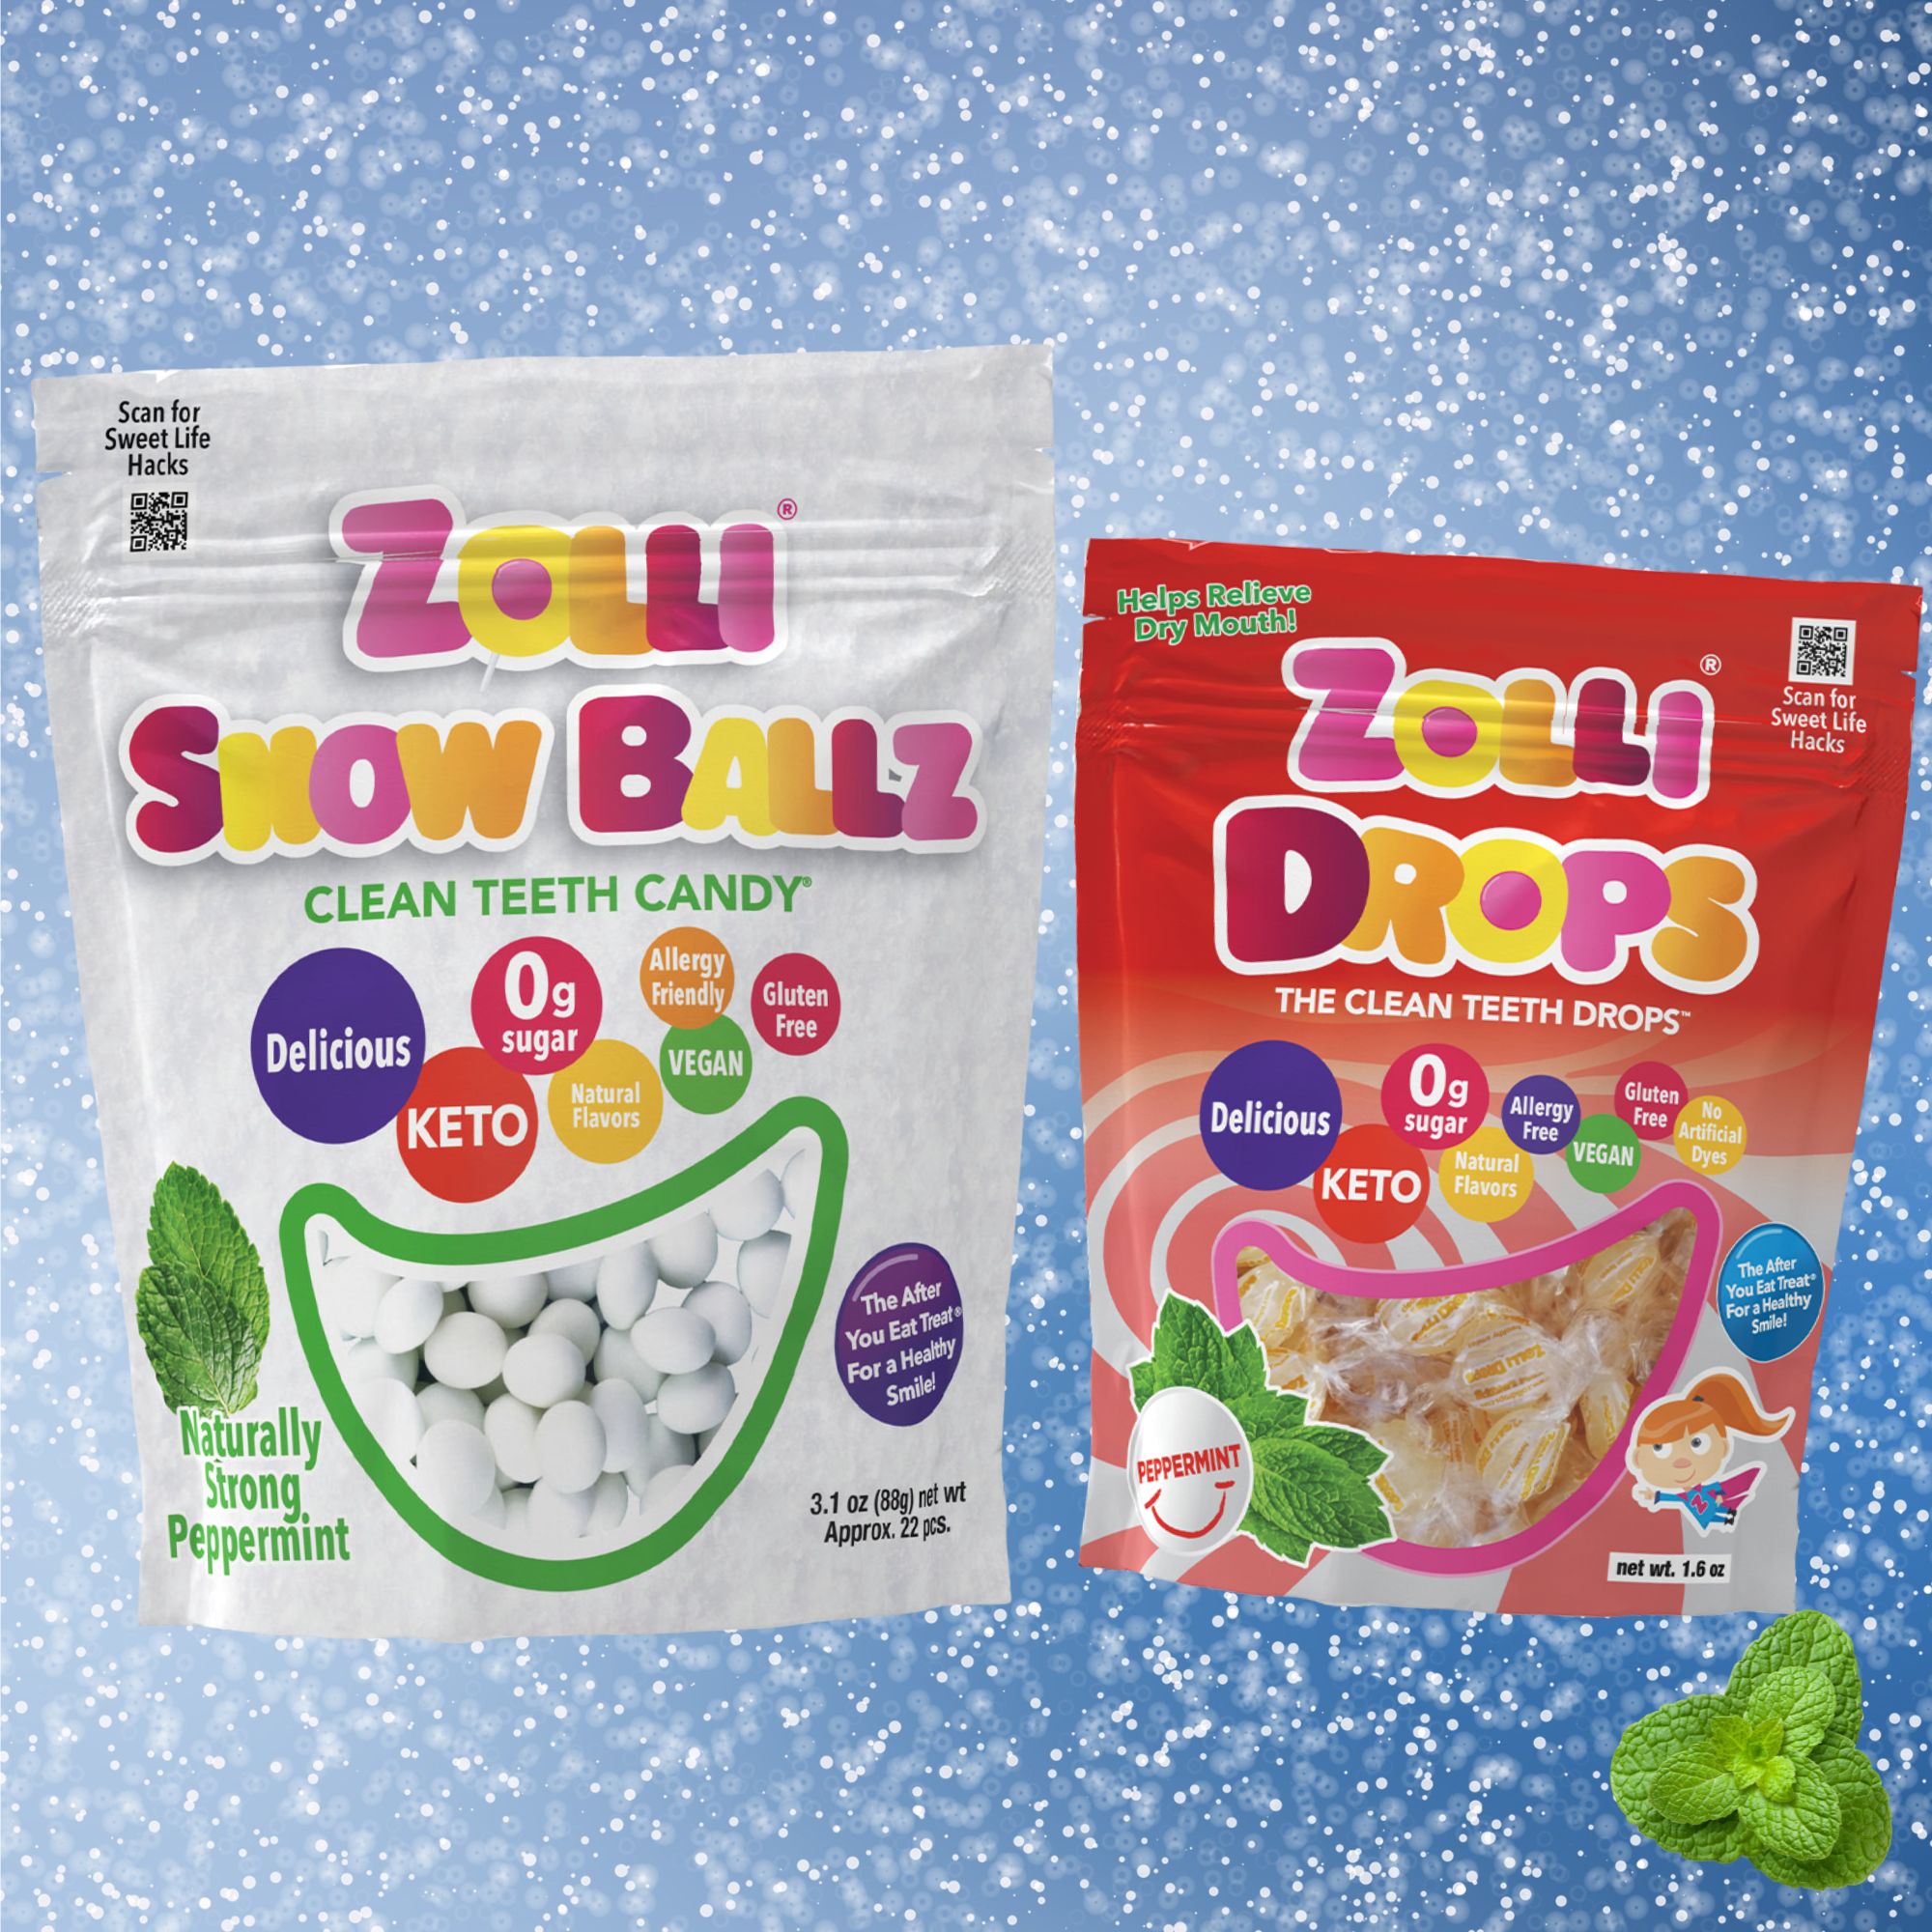 Zolli Peppermint Bundle. Zolli Peppermint Drops with Xylitol and Zolli Snow Ballz without Xylitol. Fresh Breath. Zero Sugar. Clean Teeth Candy.